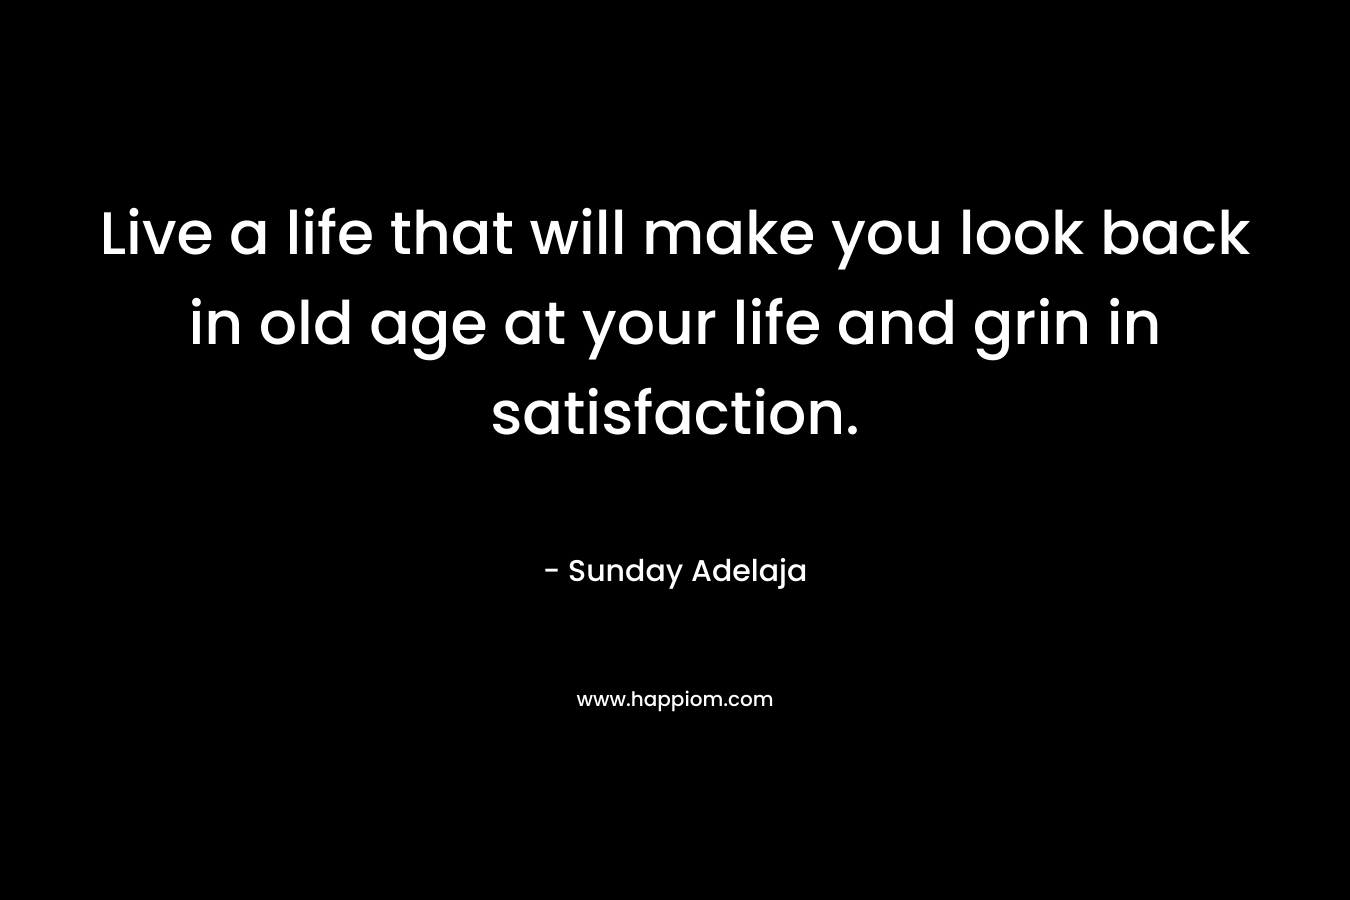 Live a life that will make you look back in old age at your life and grin in satisfaction.